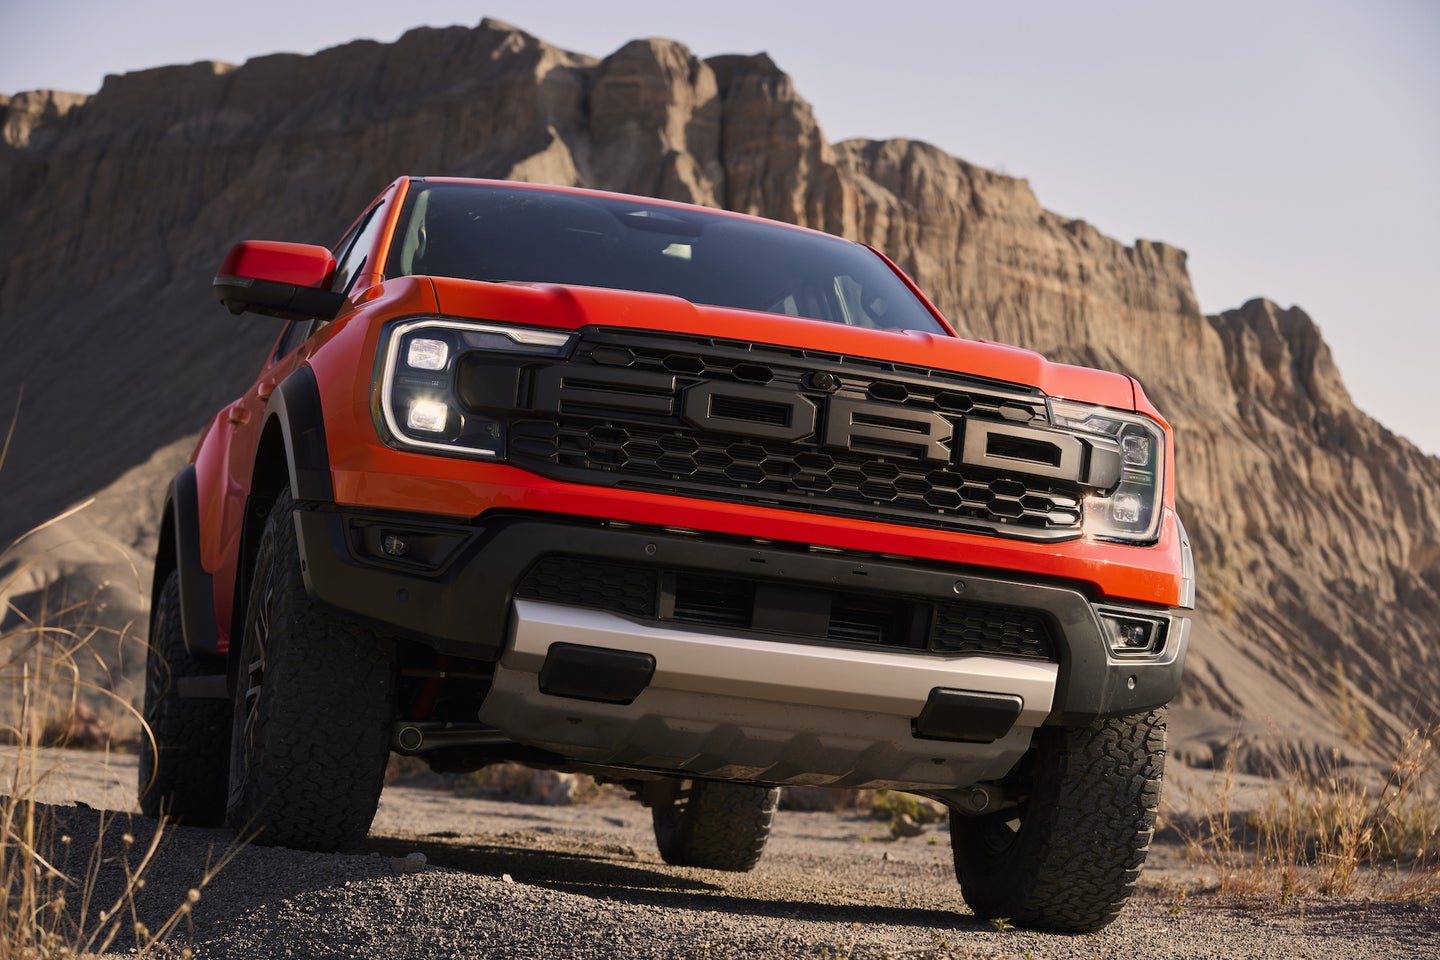 The Ford Ranger Raptor is finally coming to the US | Popular Science